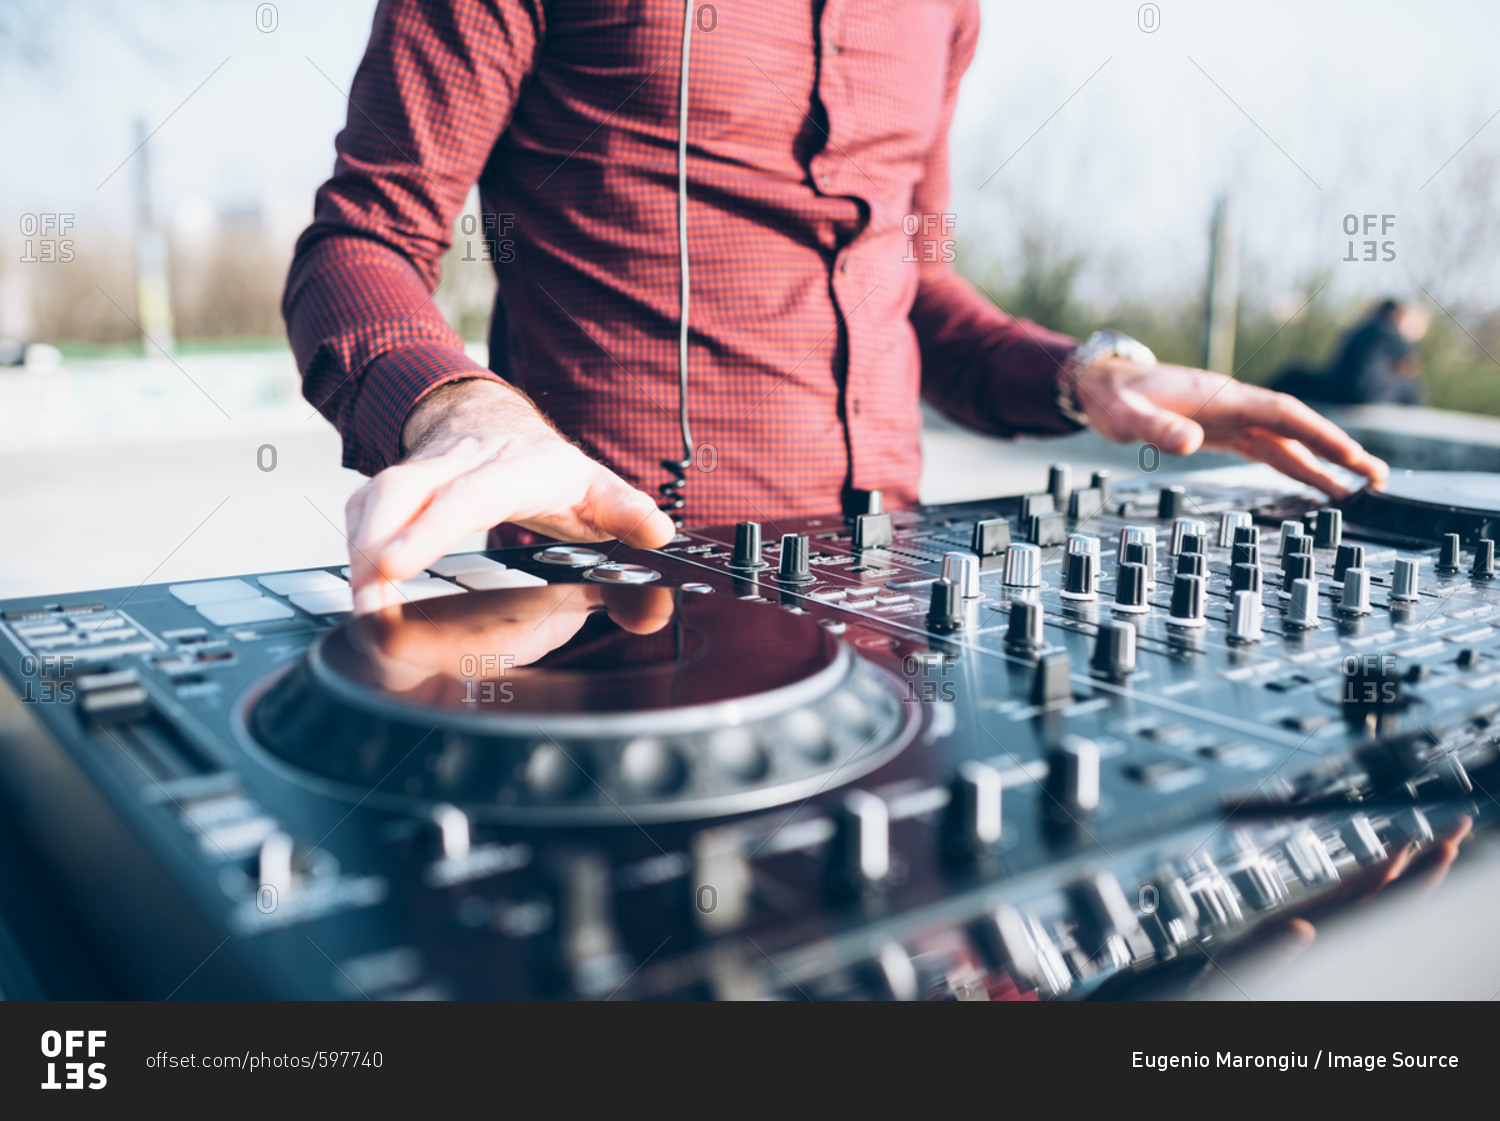 Young man using mixing desk at roof party, mid section, close-up